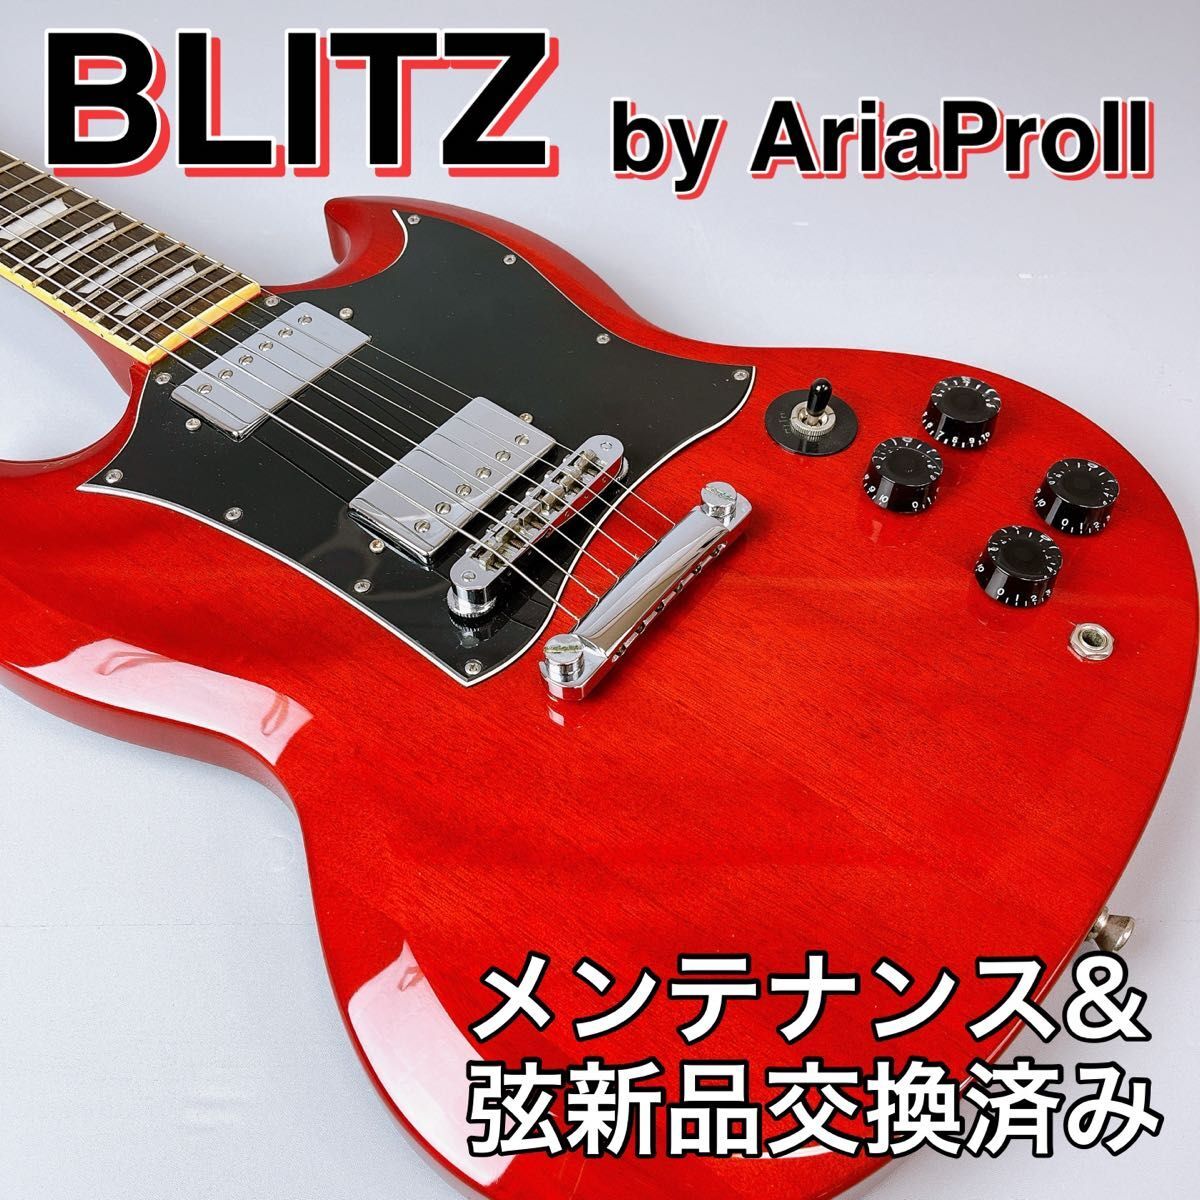 BLITZ by AriaProⅡ SG ギター　弦新品交換　メンテナンス済み　ブリッツ　チェリーレッド　ソフトケース付き_画像1